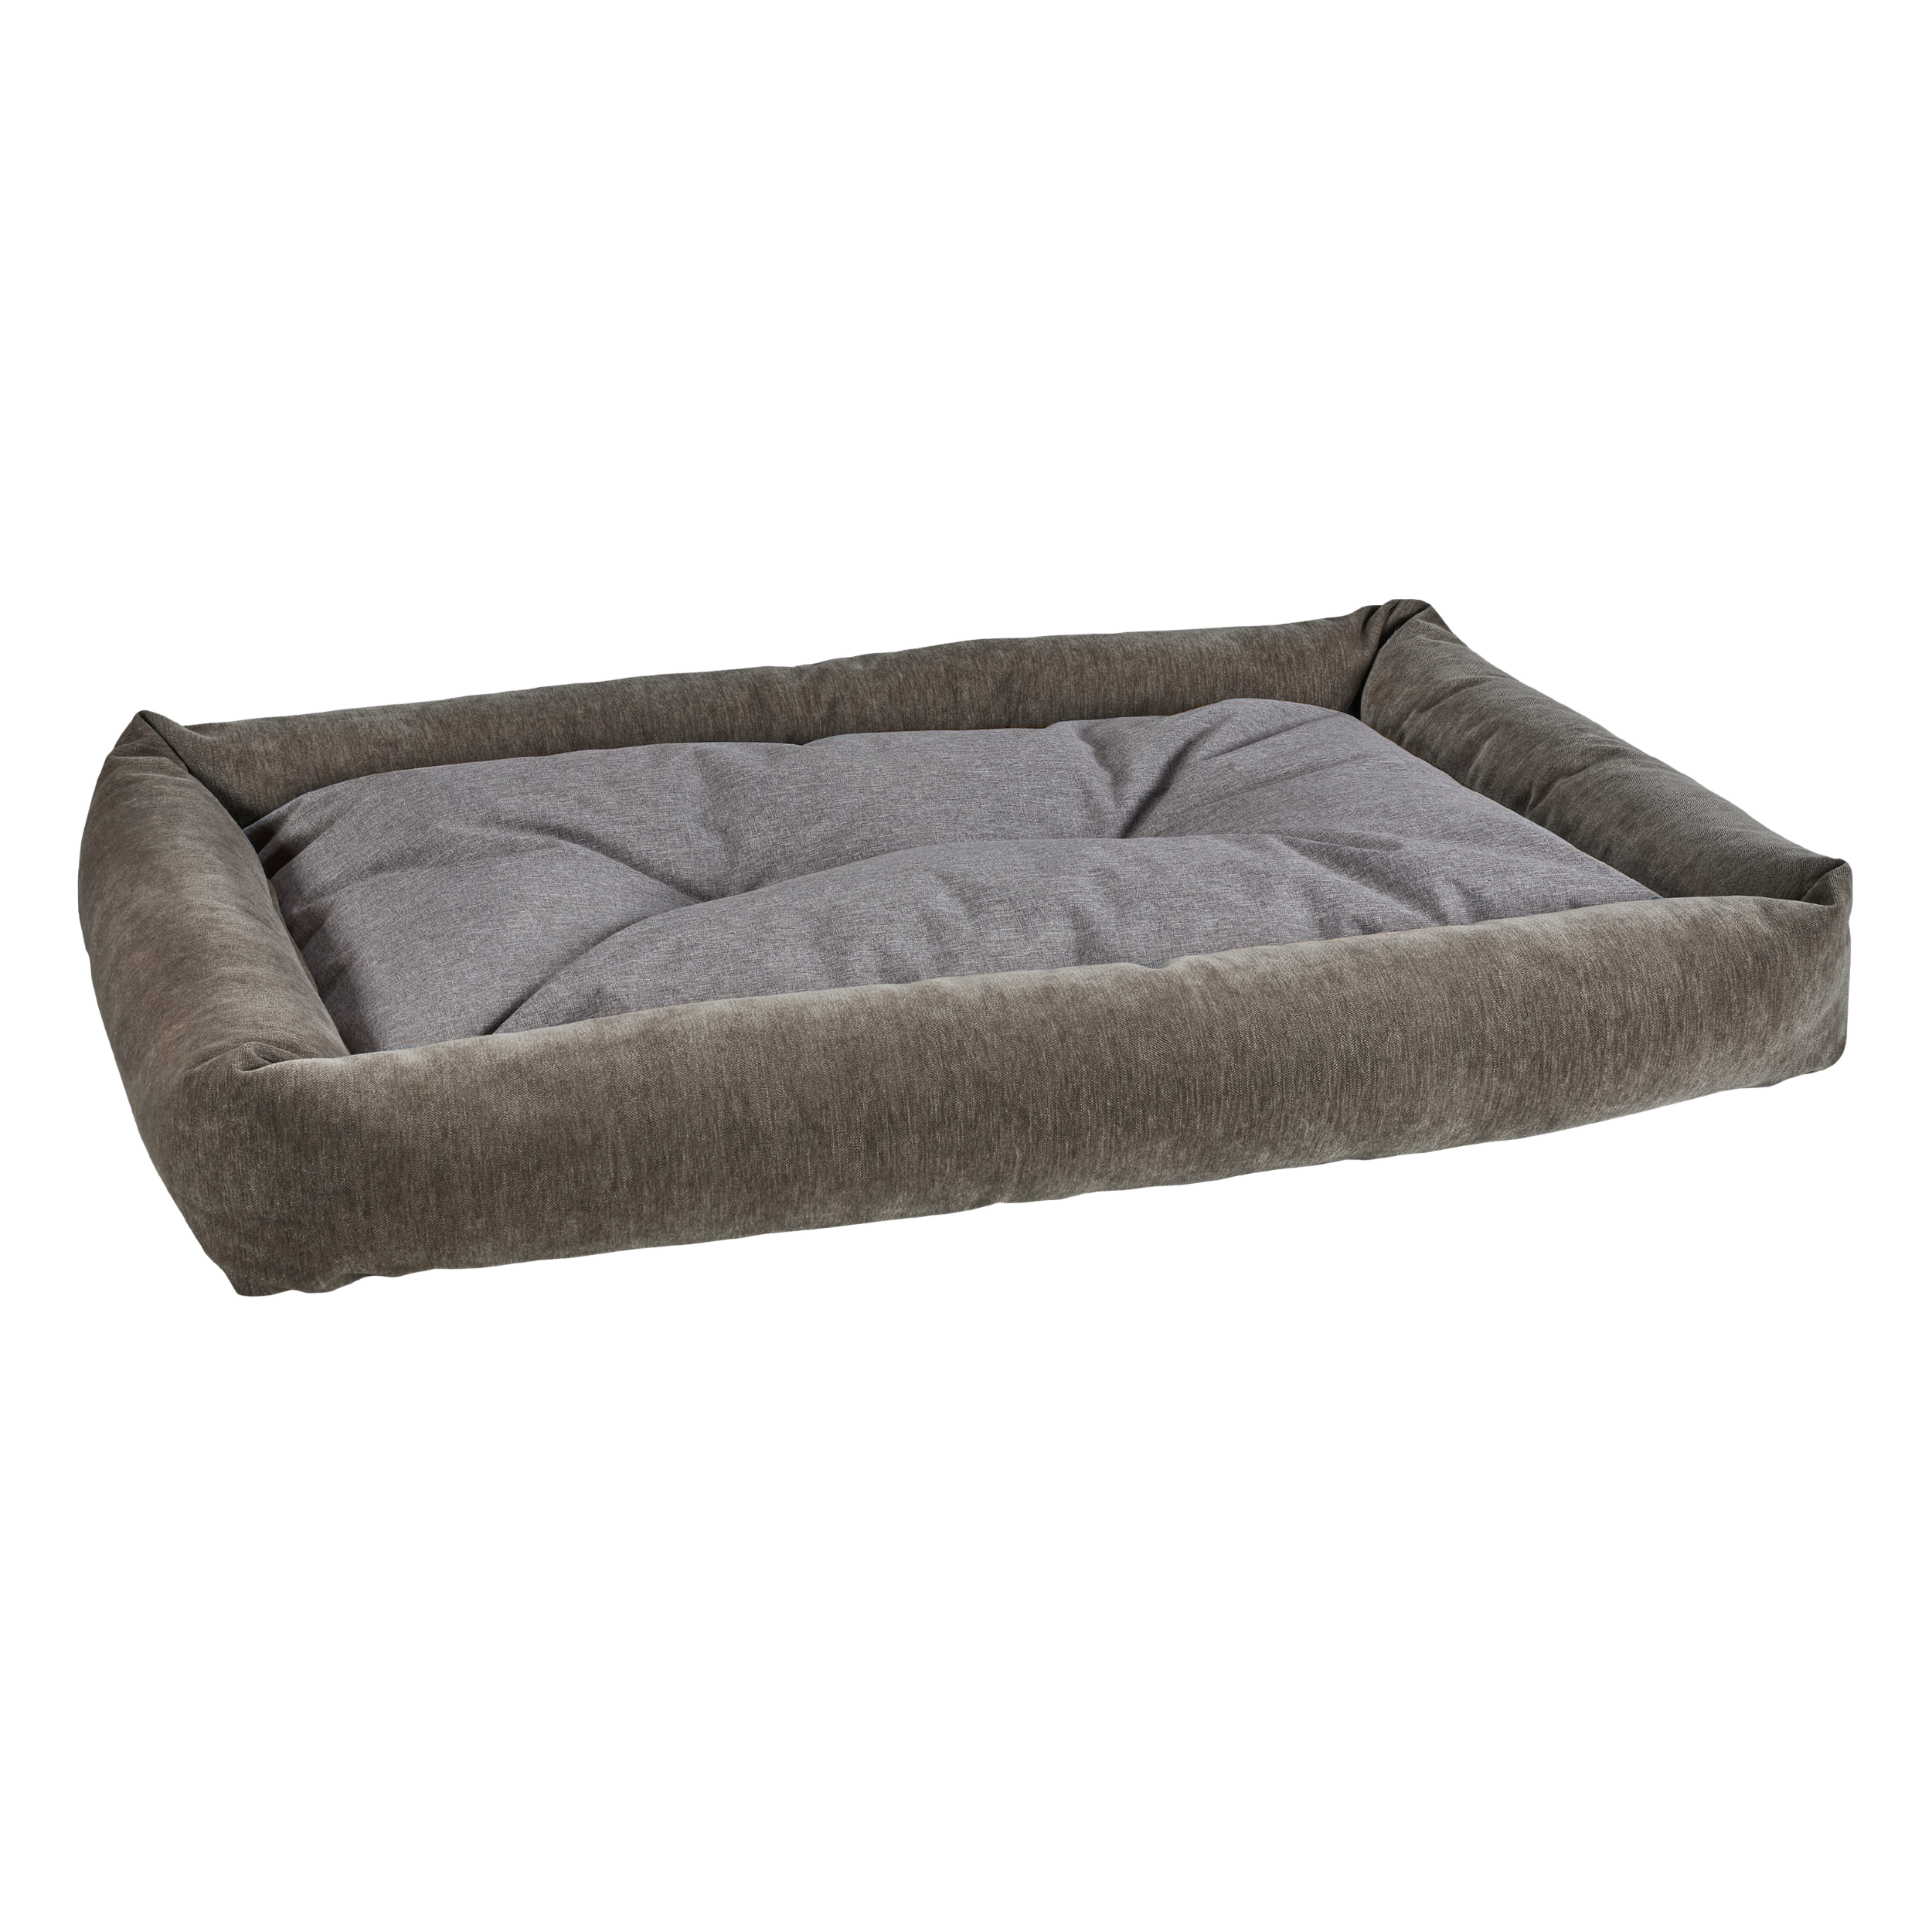 BARK-TANGO-DOG-BED-KENNEL-CRATE-MAT